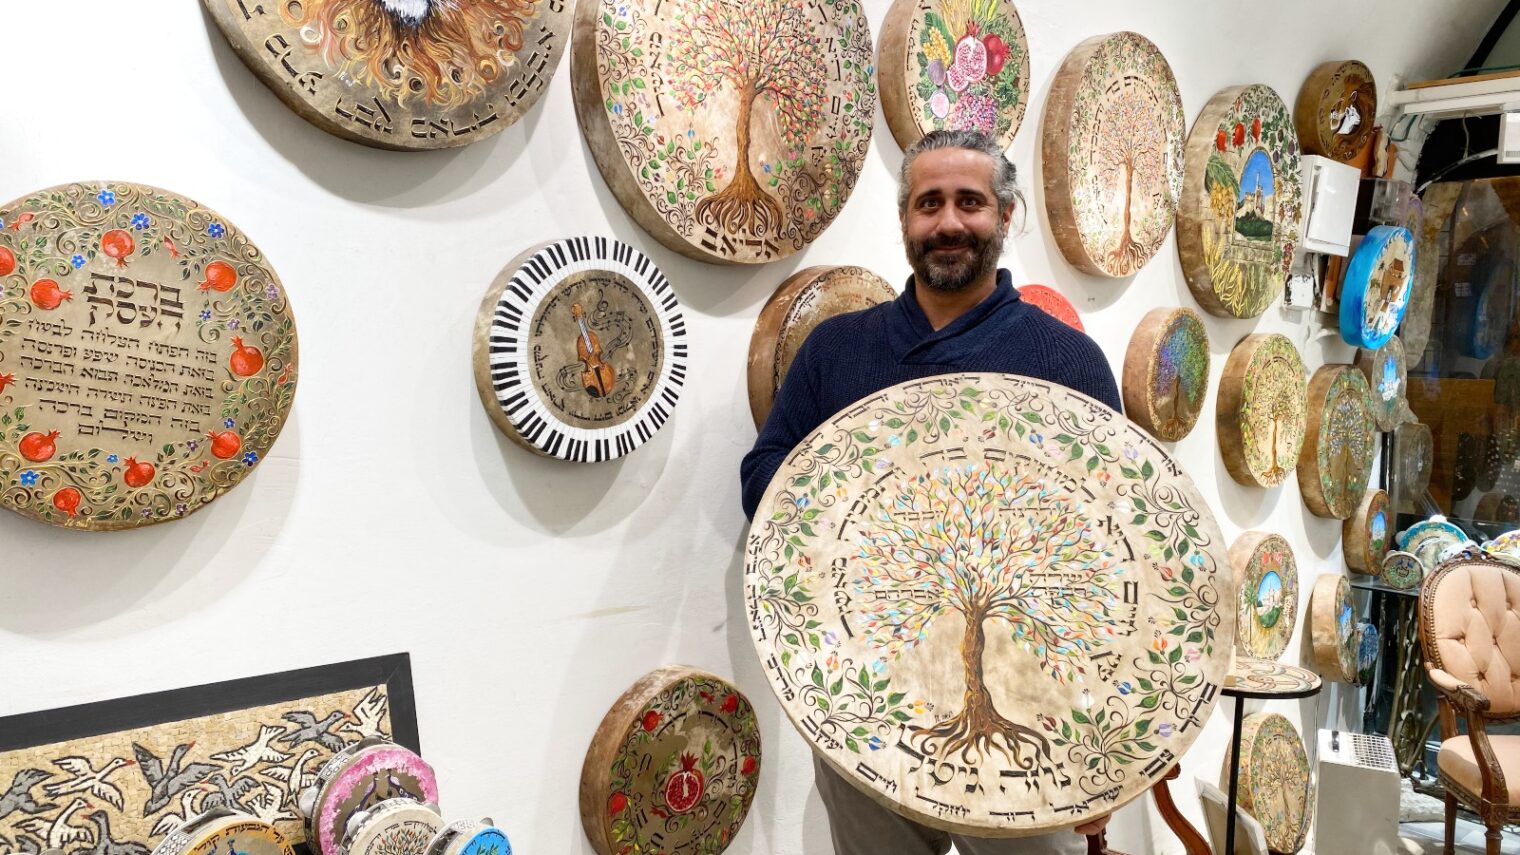 Rina galleryâ€™s Chanan Eliav with parchment-on-wood paintings. Photo by Abigail Klein Leichman